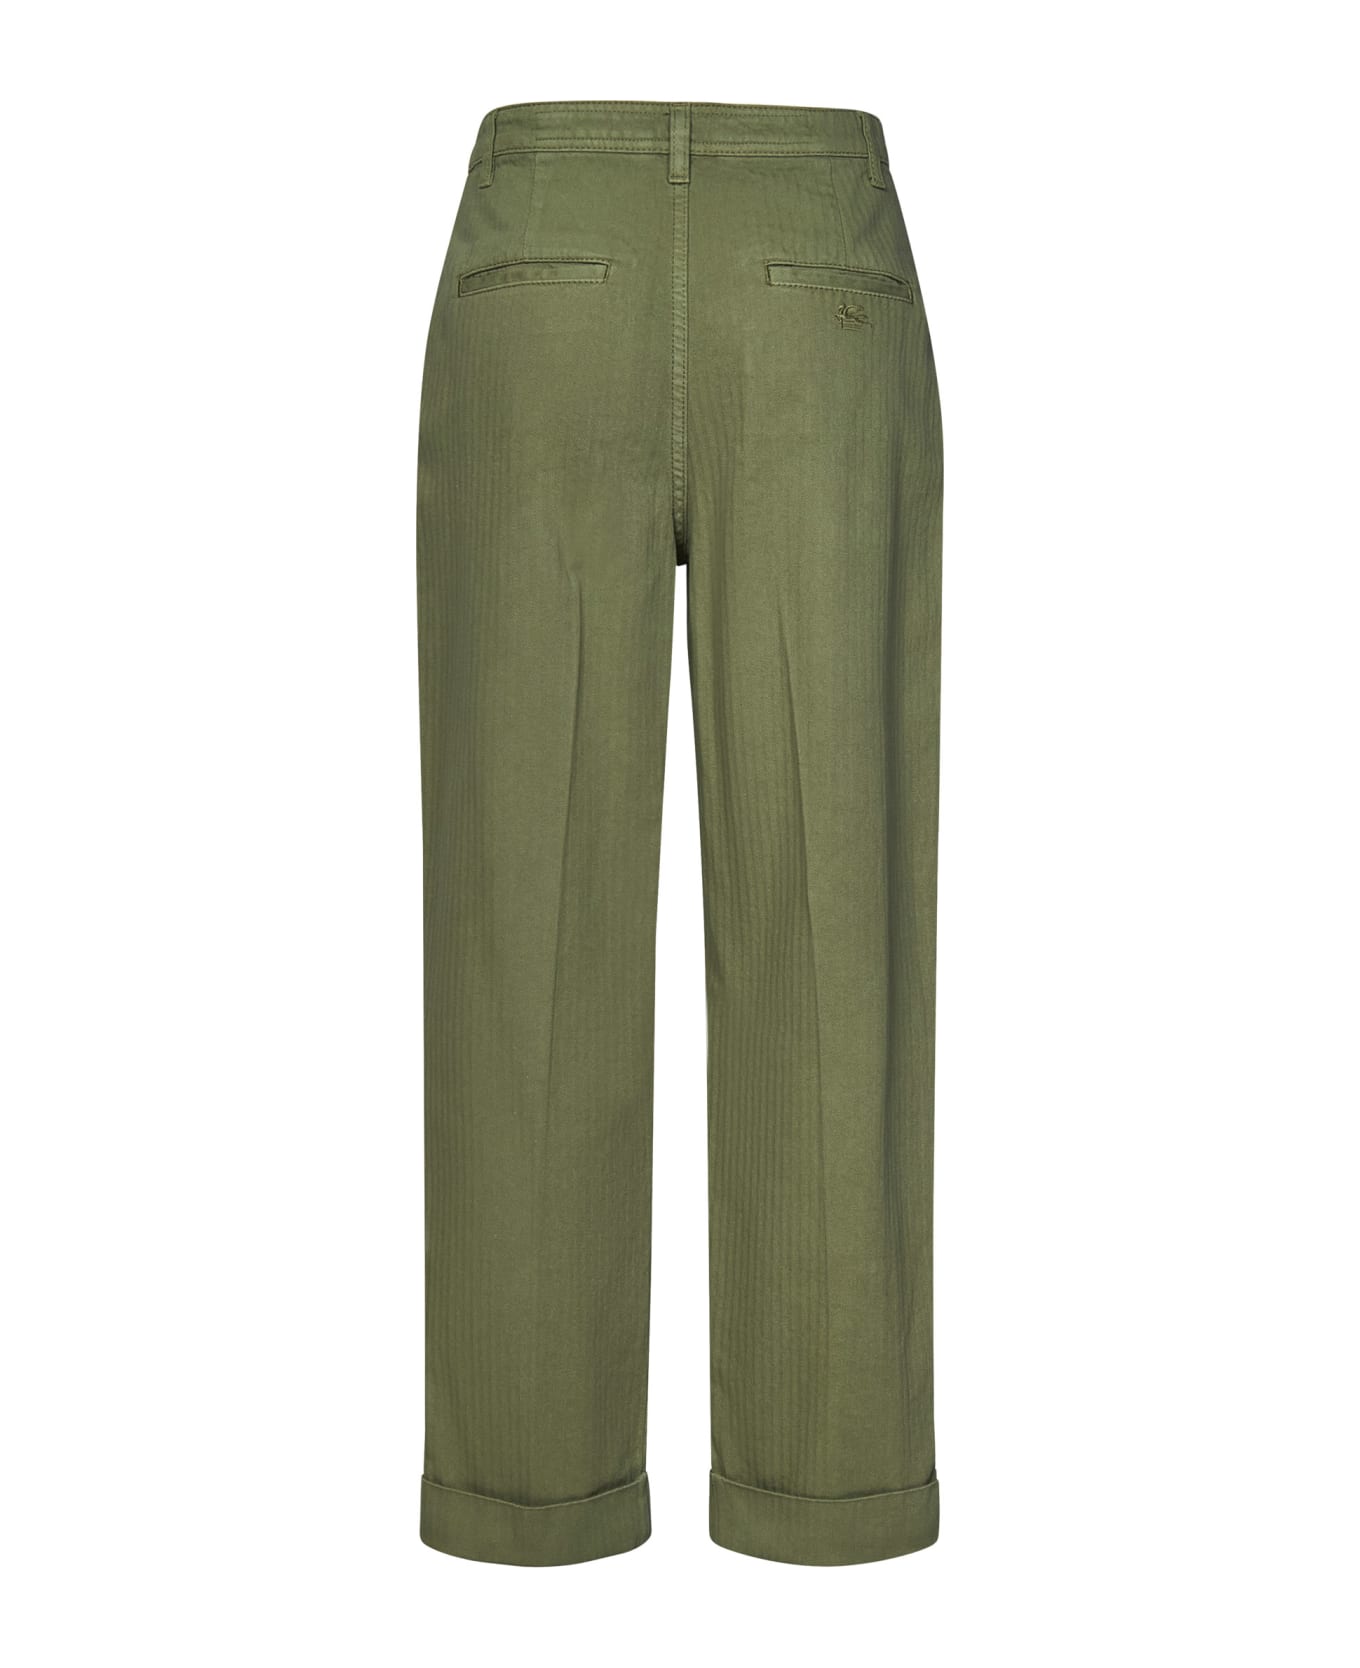 Etro Trousers - Olive green